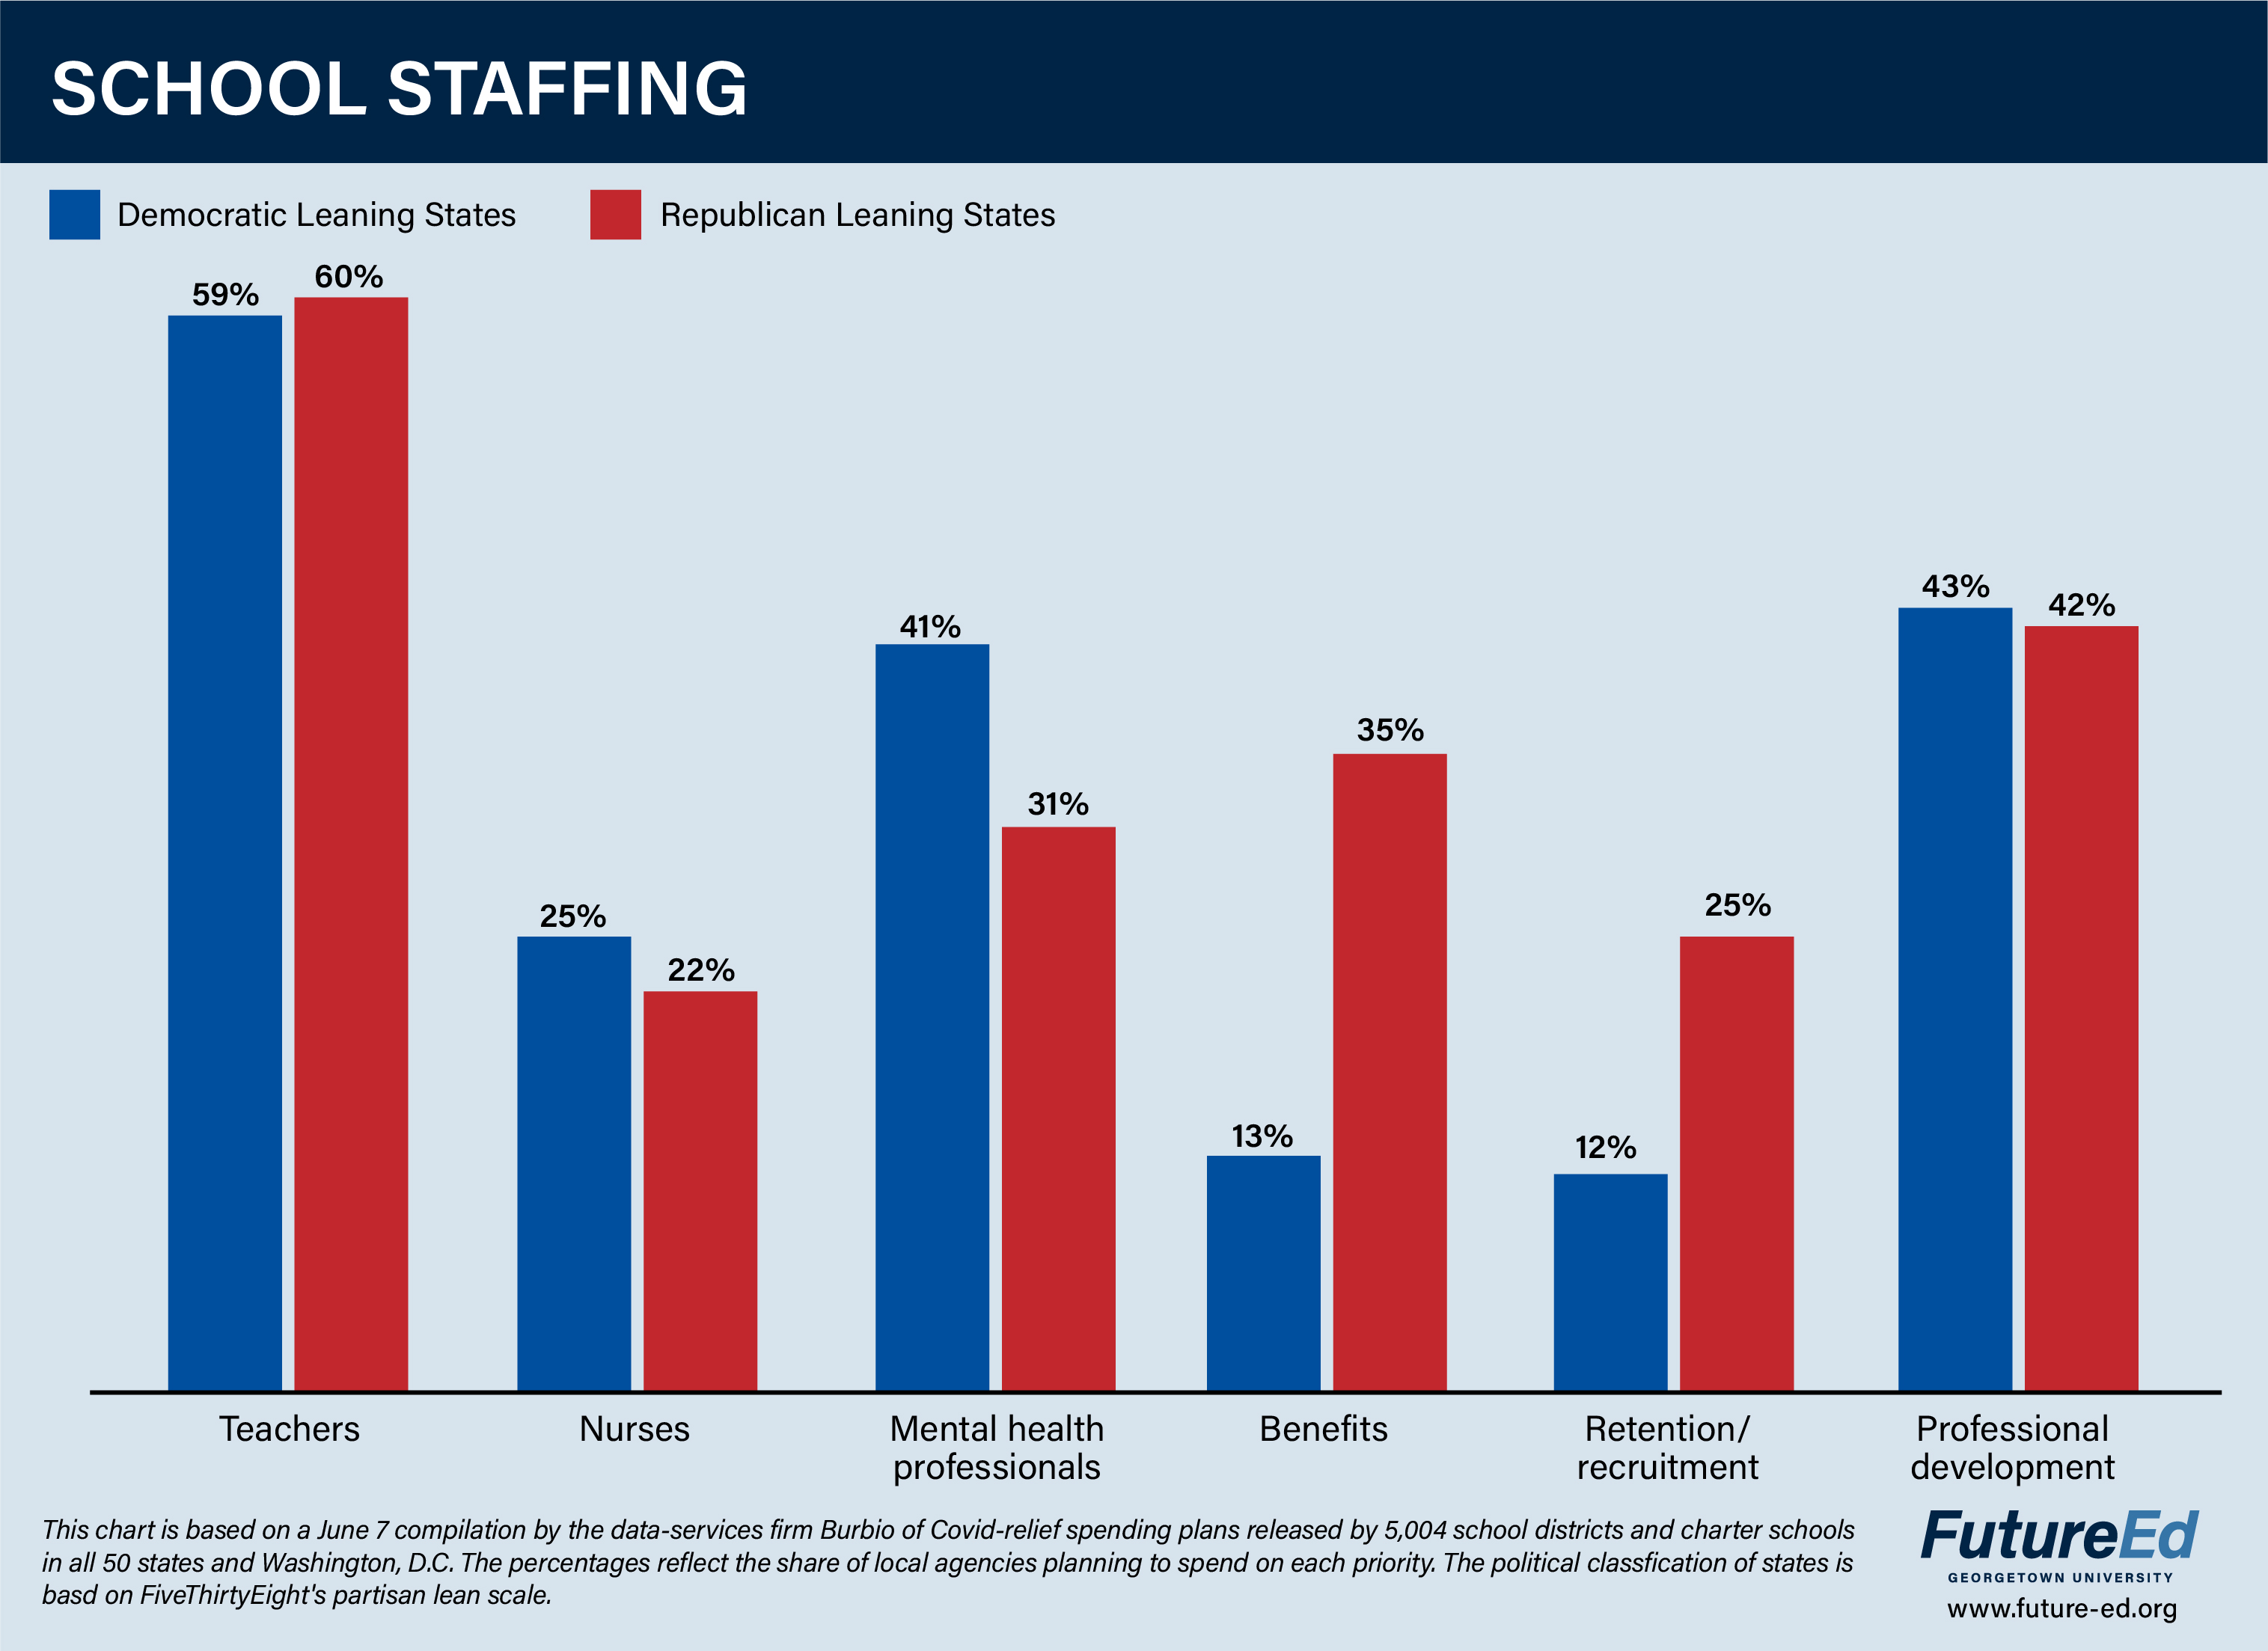 Chart: School Staffing. Teachers: democratic leaning states 59%, republican leaning states 60%. Nurses: democratic leaning states 25%, republican leaning states 22%. Mental health professionals: democratic leaning states 41%, republican leaning states 31%. Benefits: democratic leaning states 13%, republican leaning states 35%. Recruitment/retention: democratic leaning states 12%, republican leaning states 25%. Professional development: democratic leaning states 43%, republican leaning states 42%. (This chart is based on a June 7, 2022 compilation by the data-services firm Burbio of Covid-relief spending plans released by 5,004 school districts and charter schools in all 50 states and Washington, D.C. The percentages reflect the share of local agencies planning to spend on each priority. The political classification of states is based on FiveThirtyEight's partisan lean scales.) 